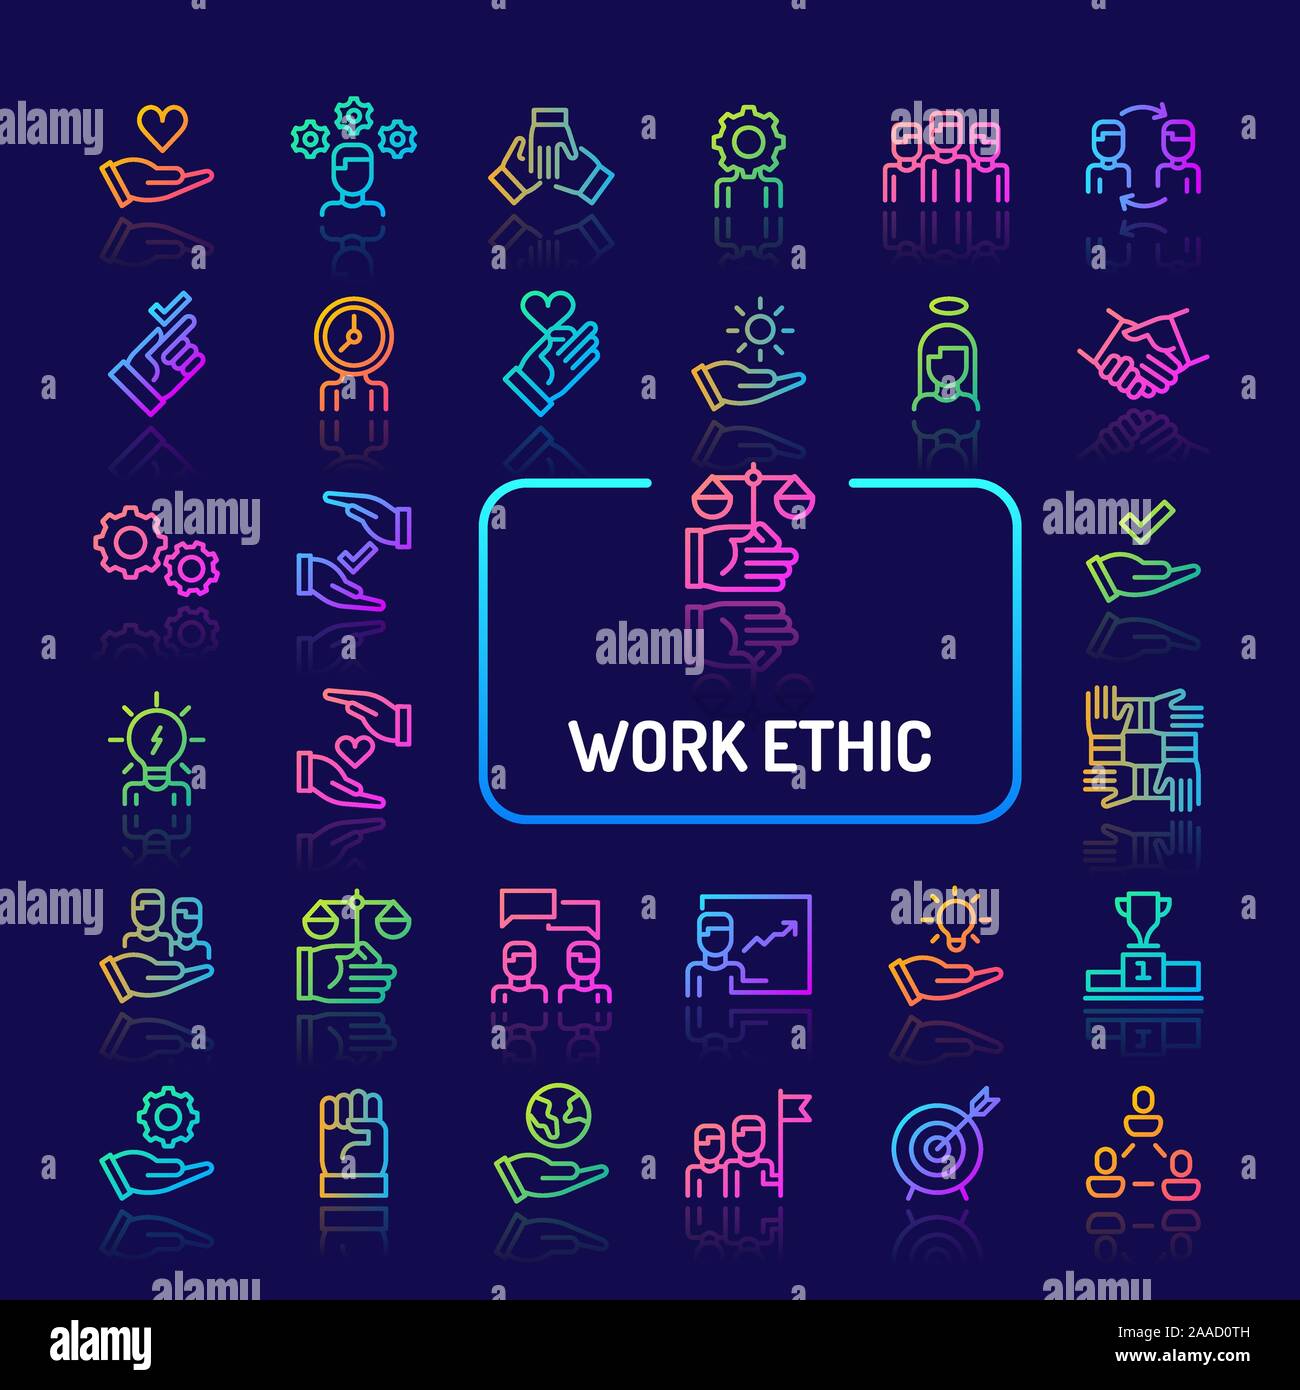 Simple gradient color icons isolated over dark background related to work ethics; Teamwork, morality, proficiency, optimism and empathy. Vector signs Stock Vector